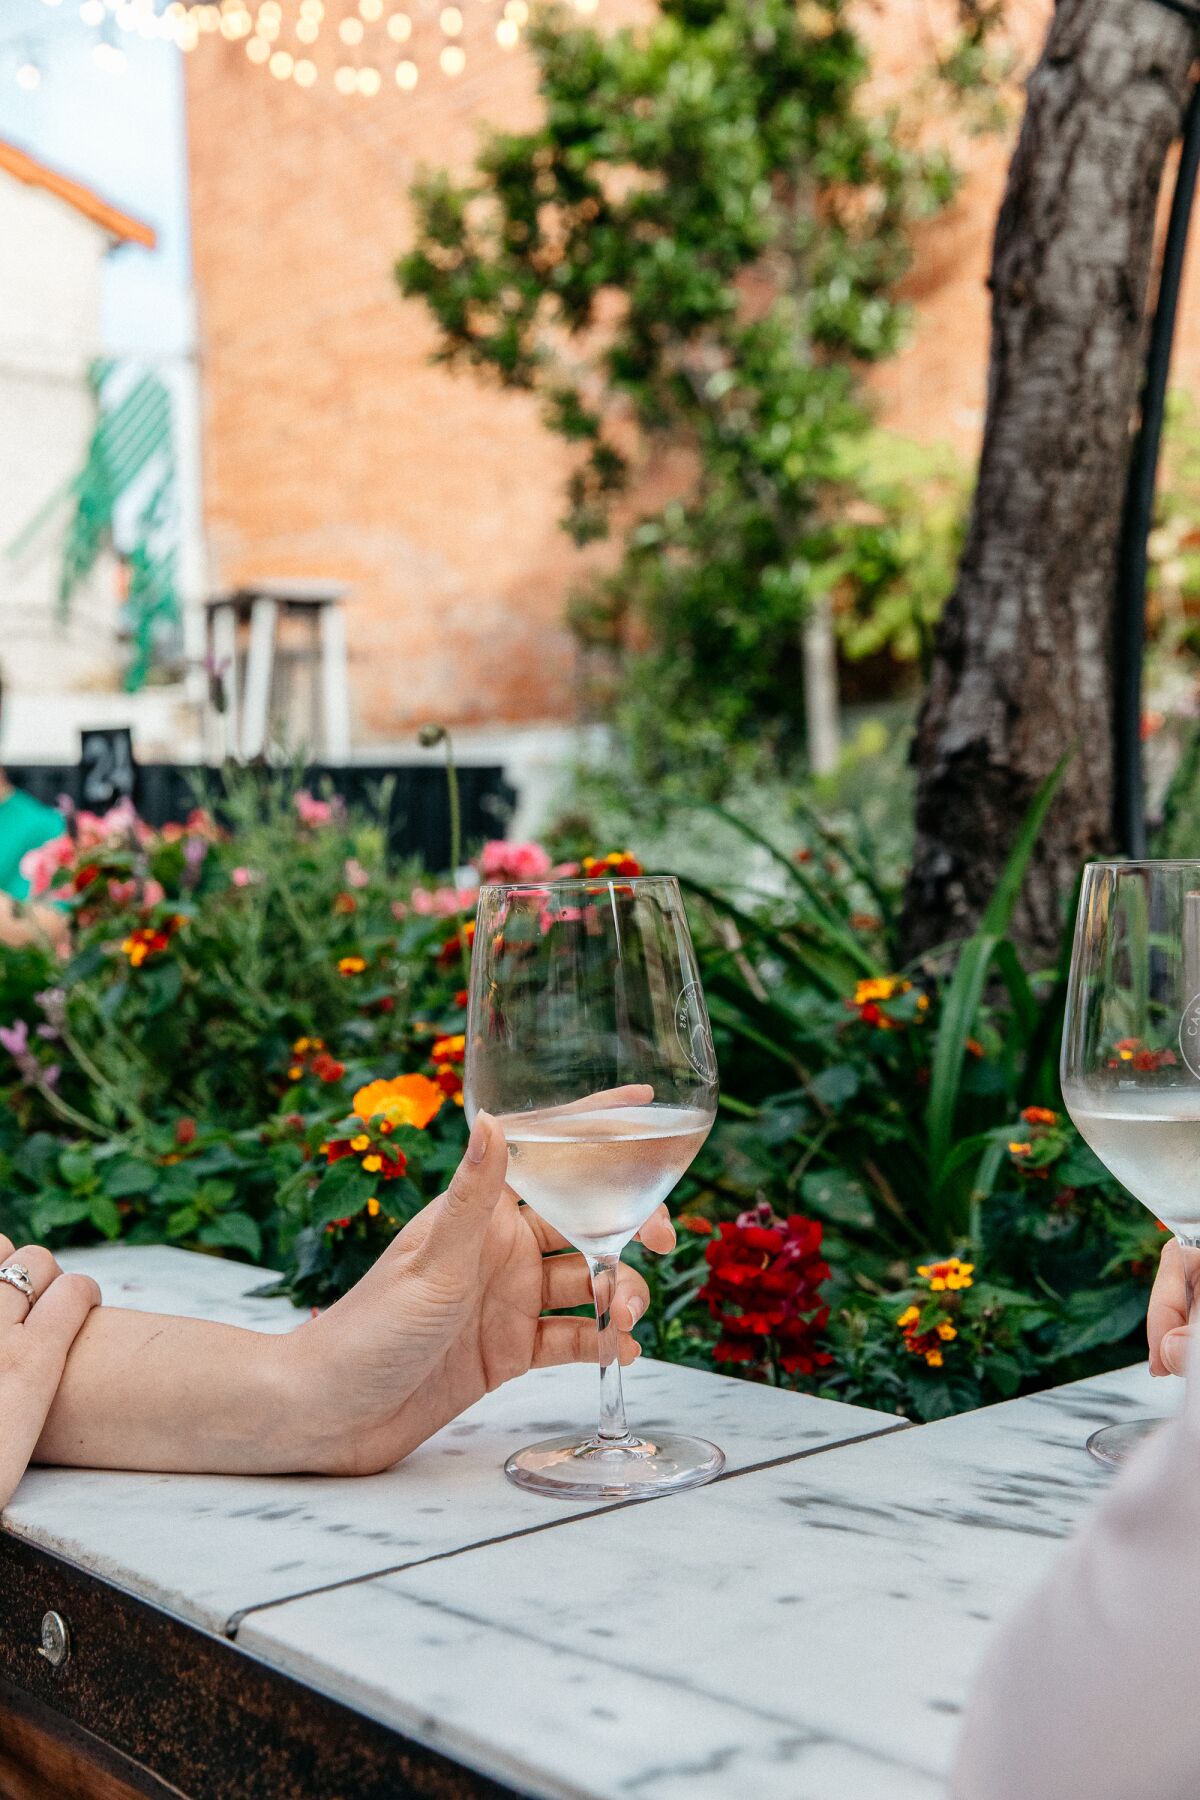 Enjoy a glass of wine at Carruth Cellars’ secluded patio.